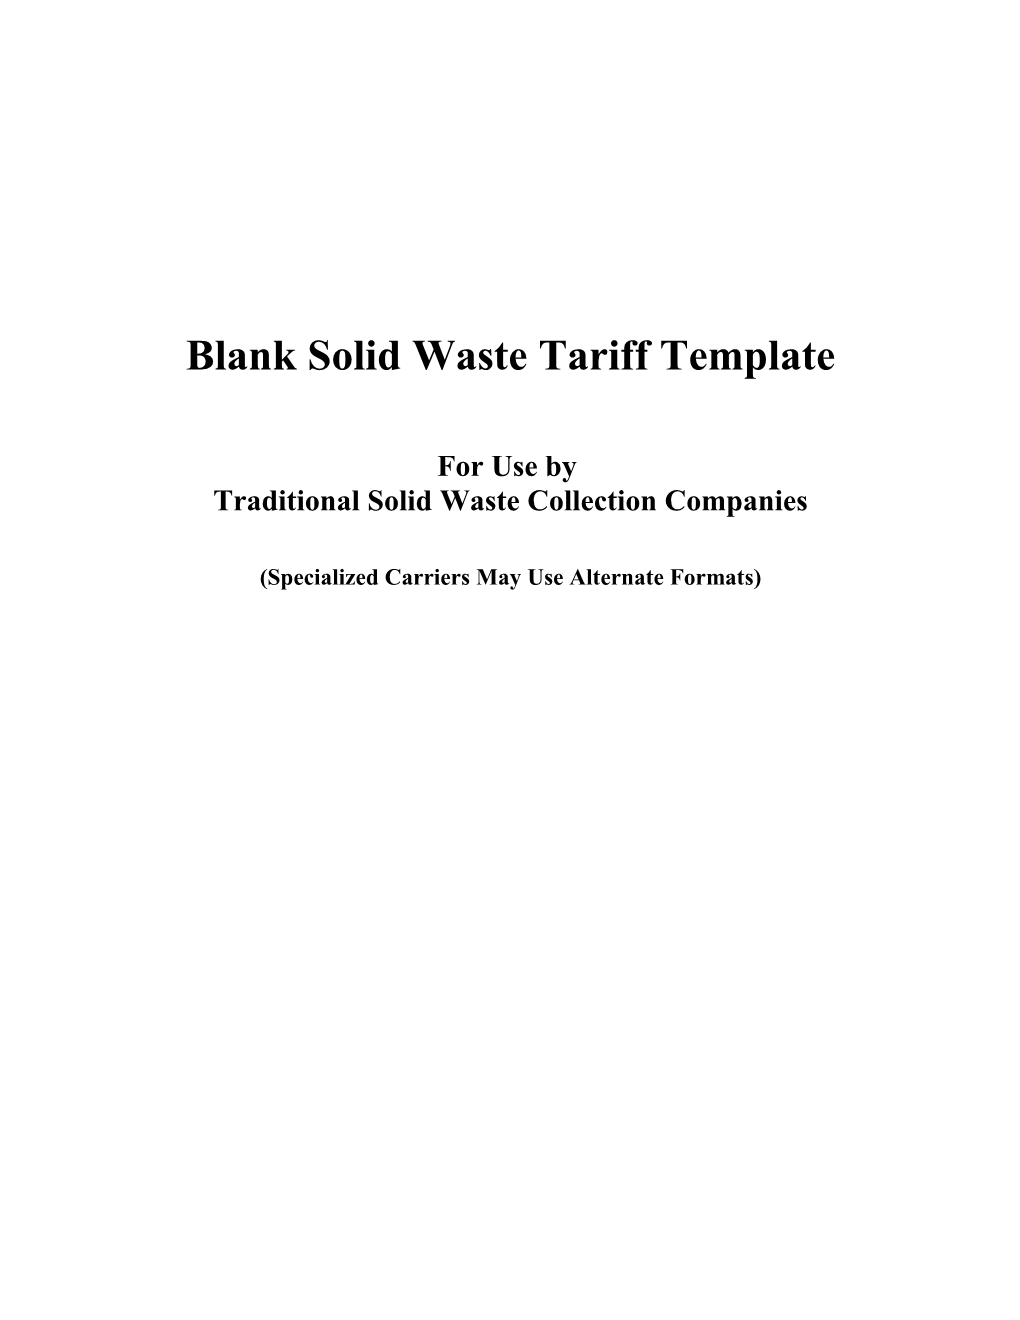 E-File Blank Template - Solid Waste Tariff